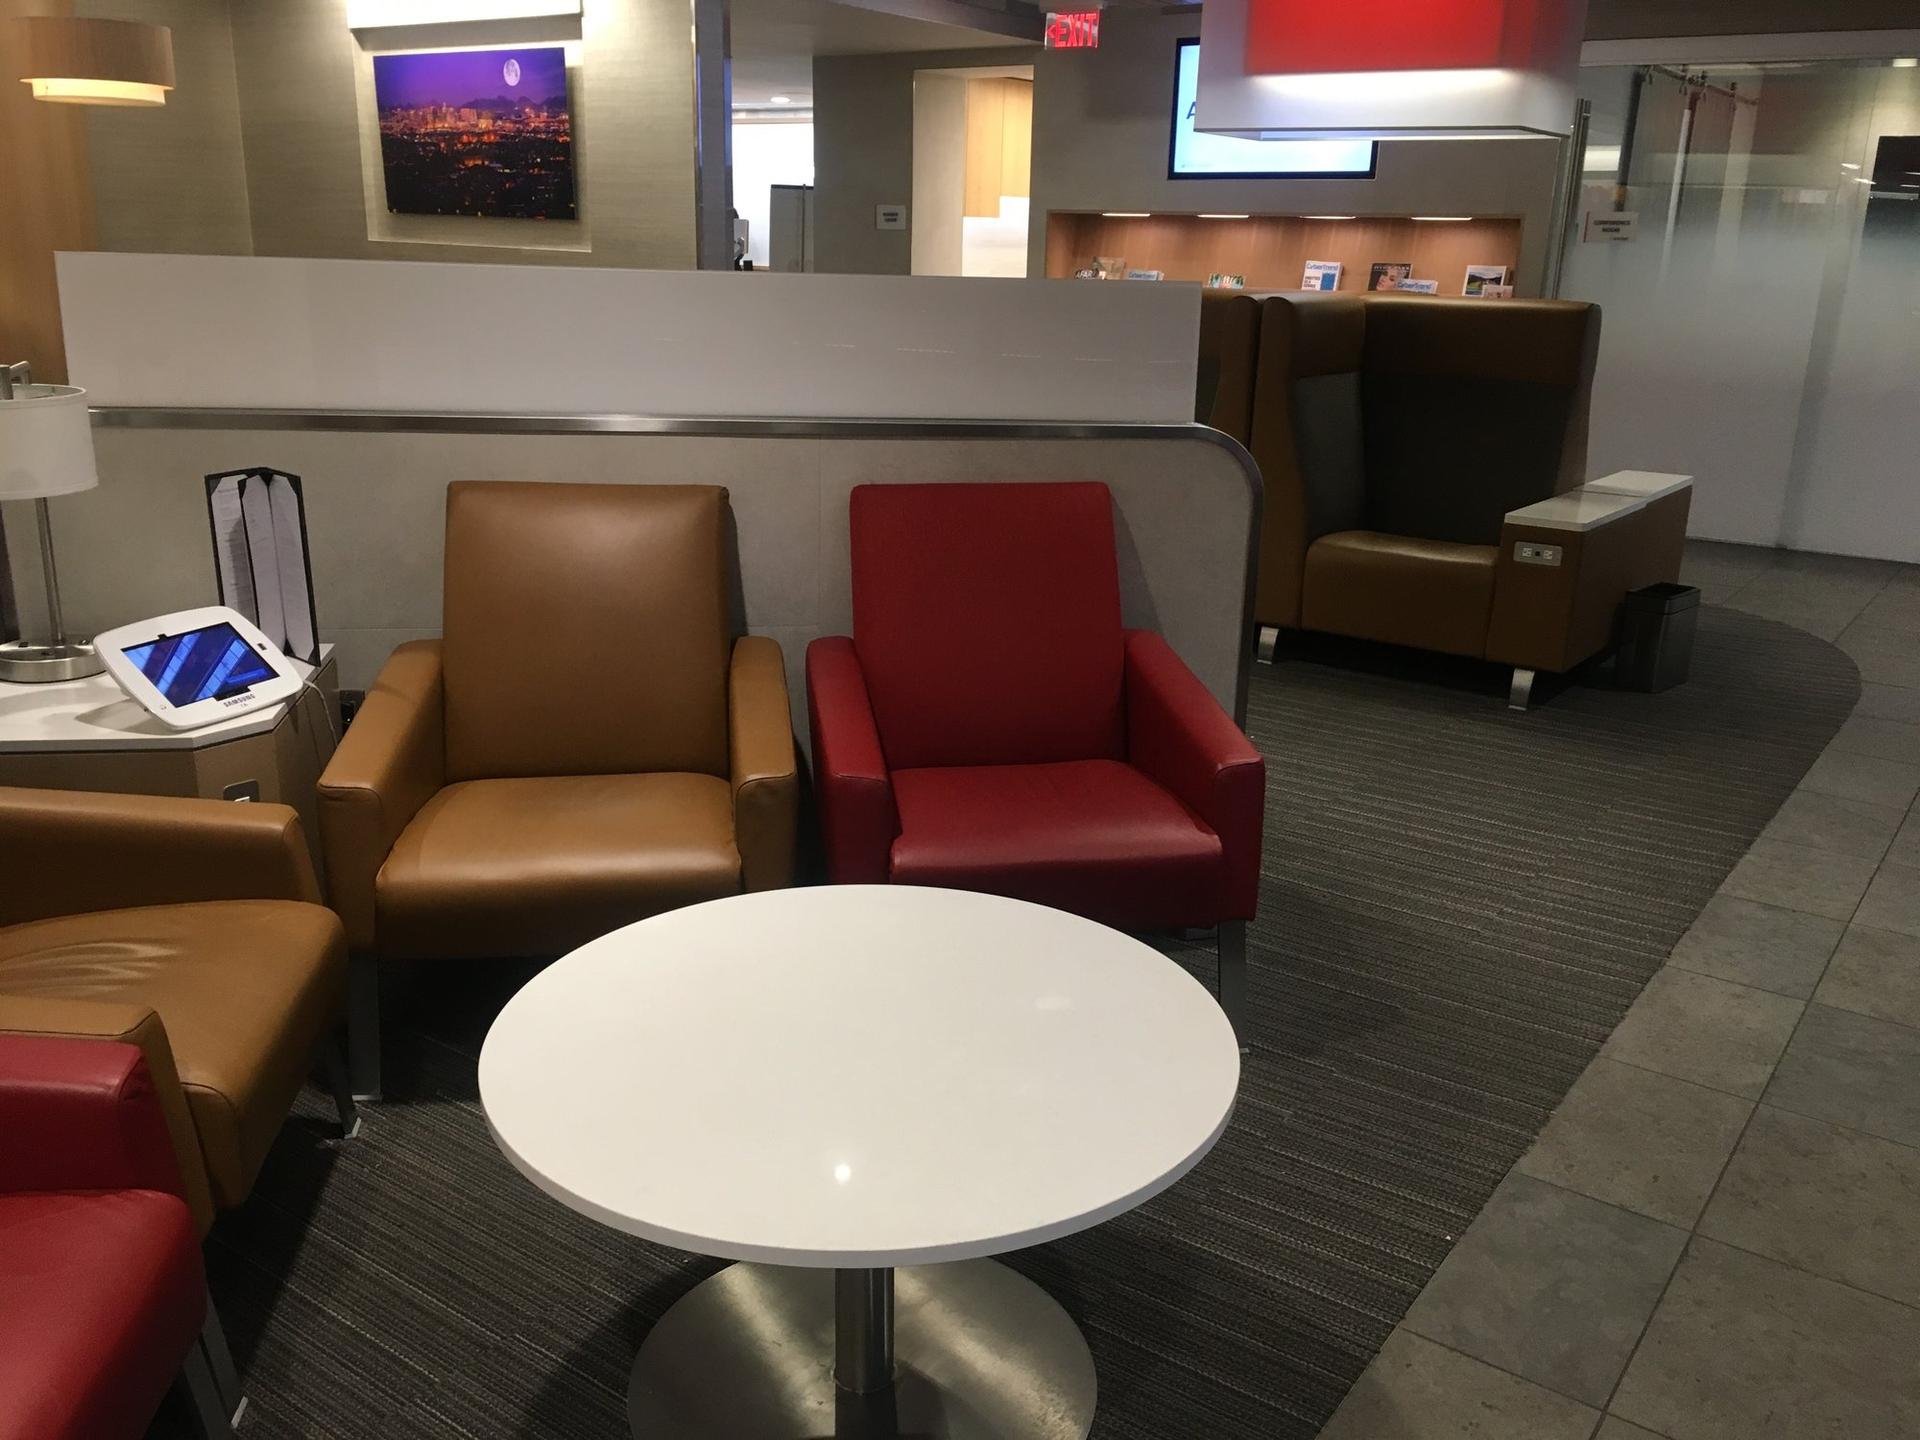 American Airlines Admirals Club (Gate A7) image 12 of 25